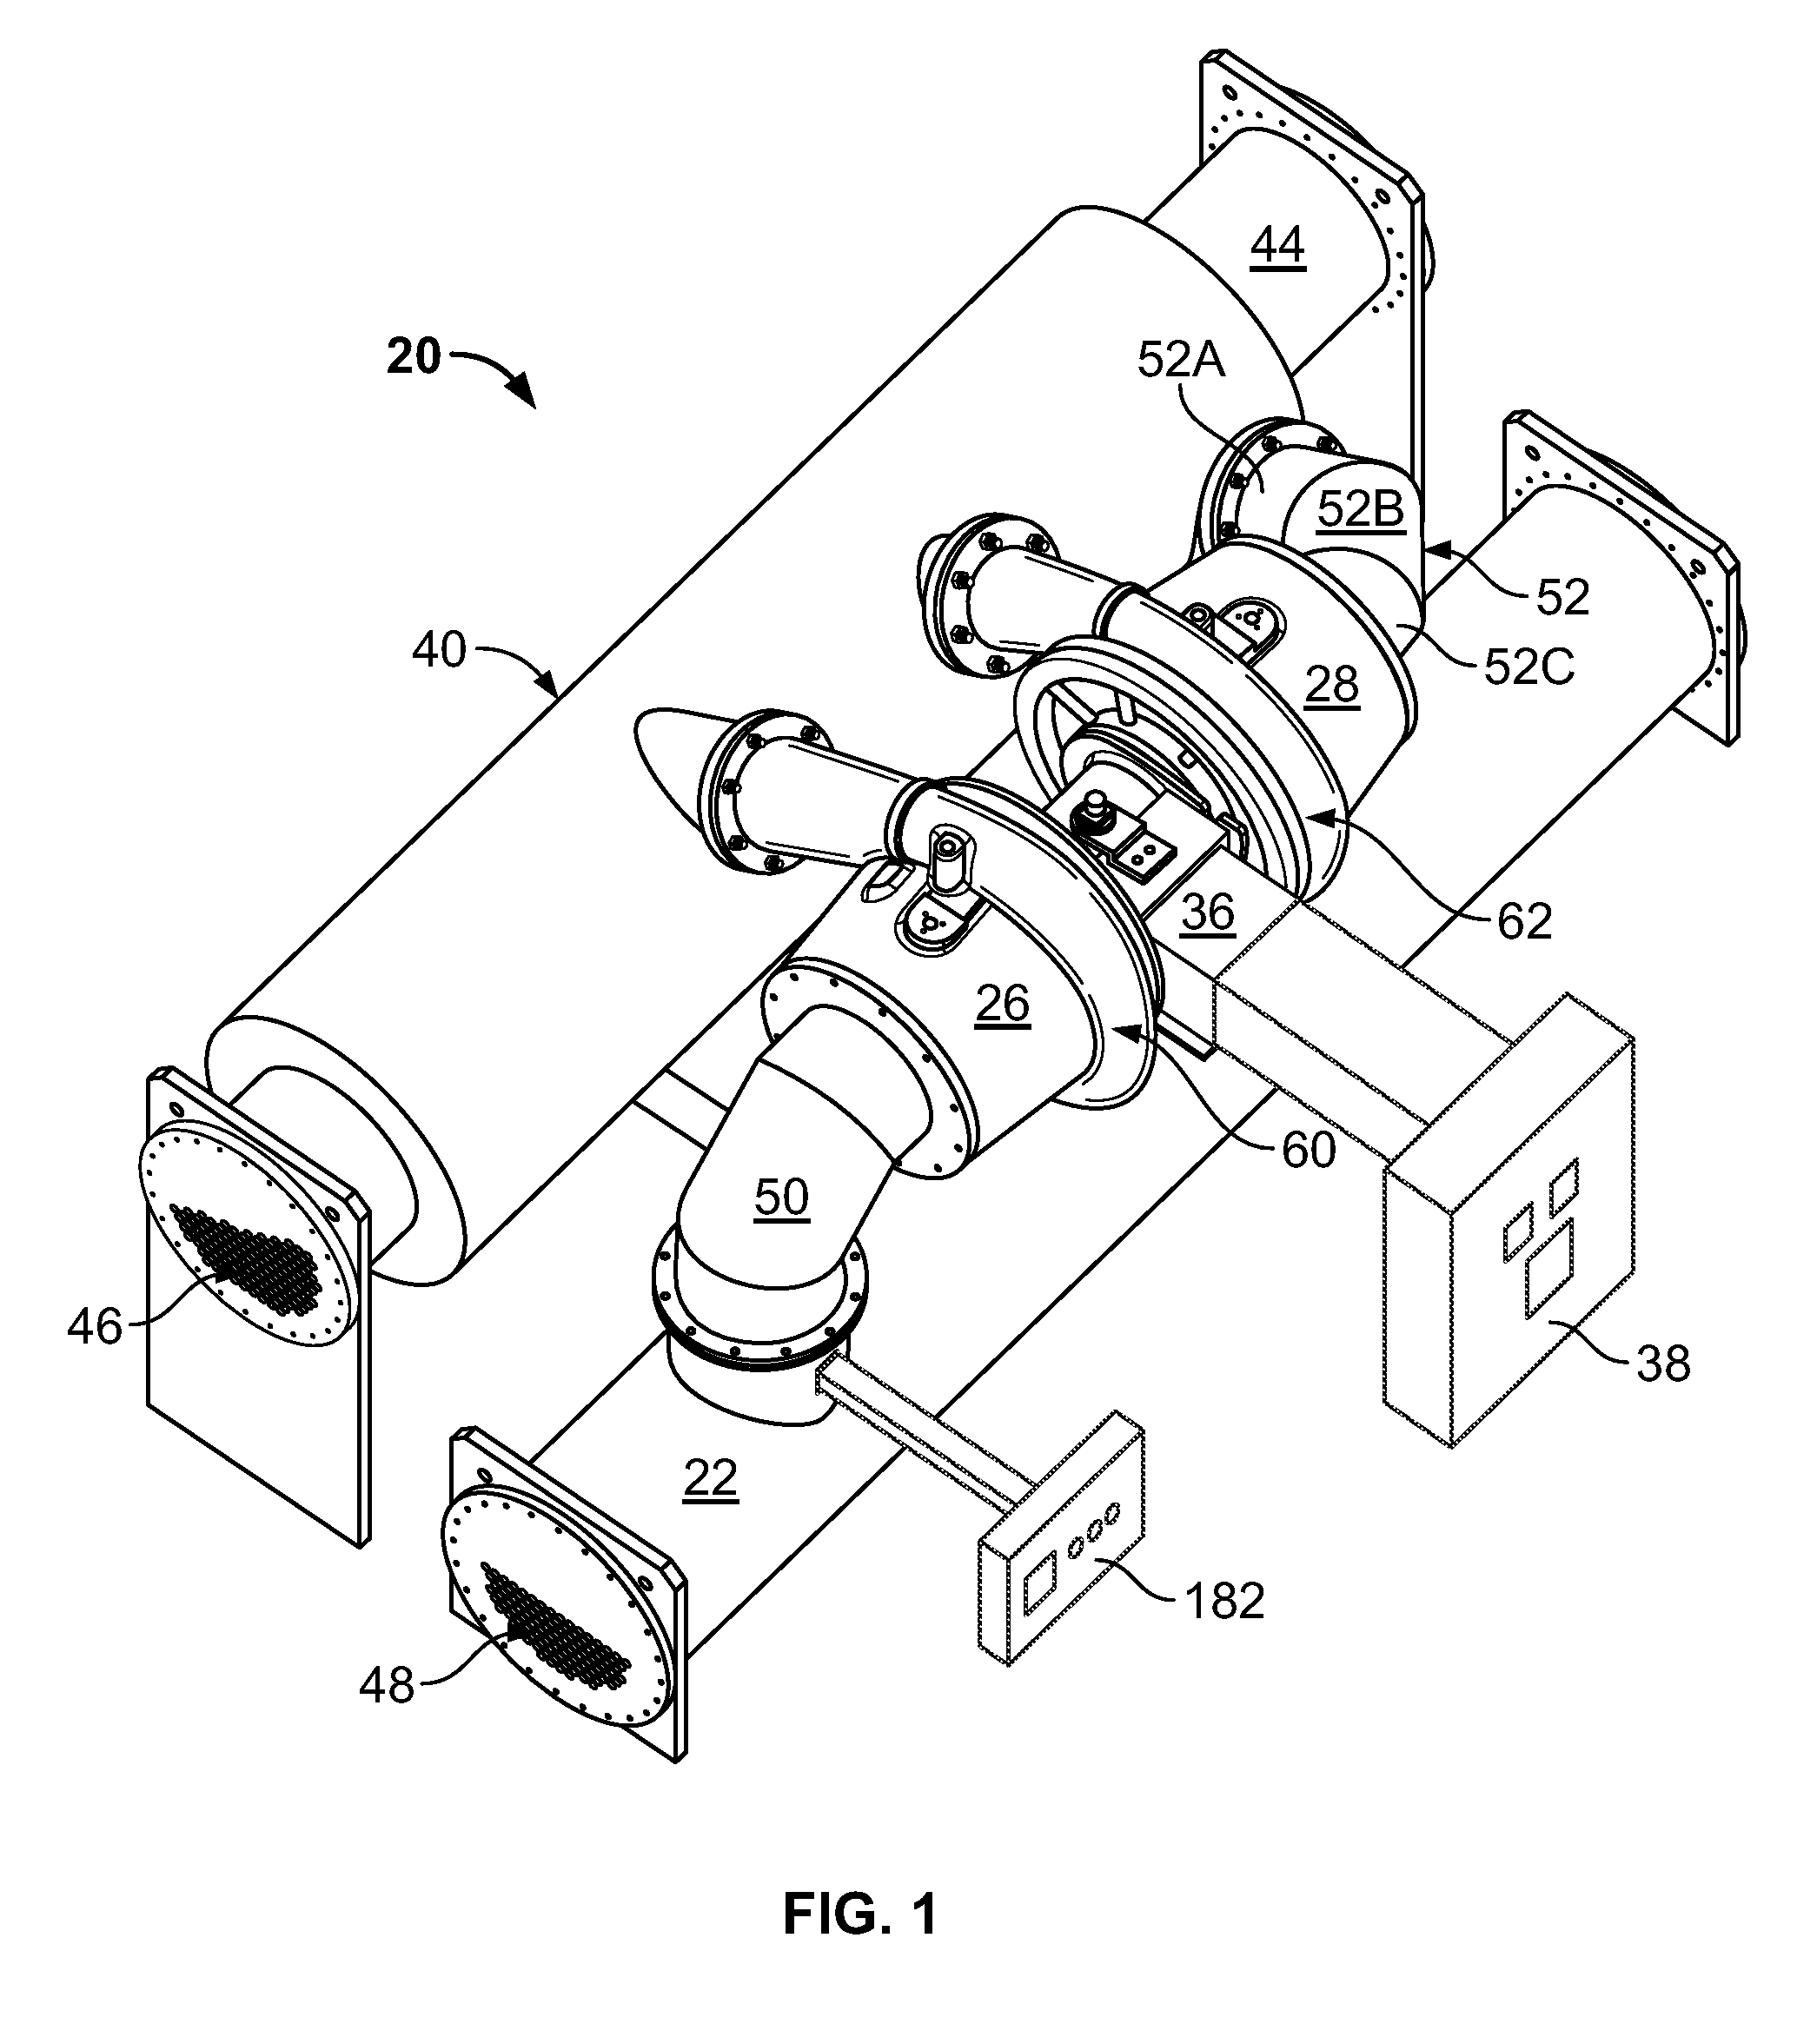 Centrifugal compressor assembly and method